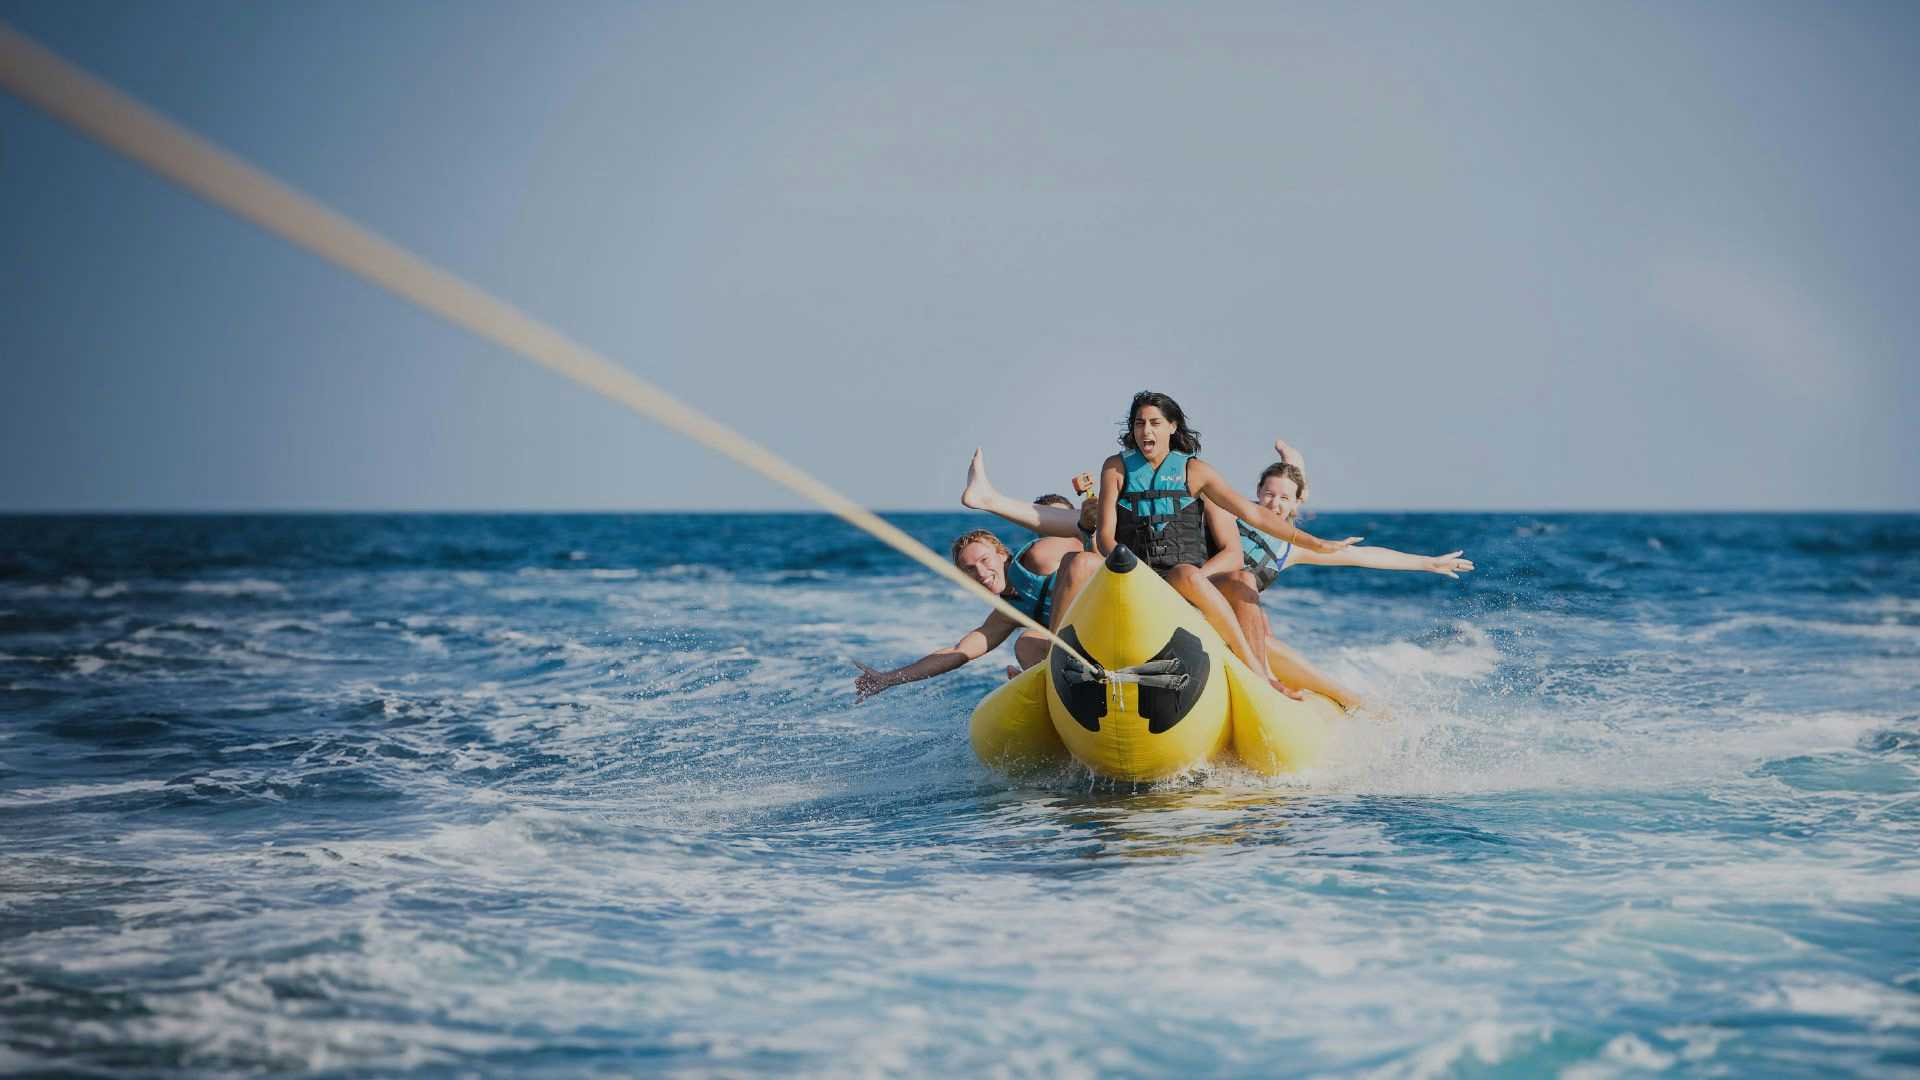 MedSailors guests on a banana boat in Greece